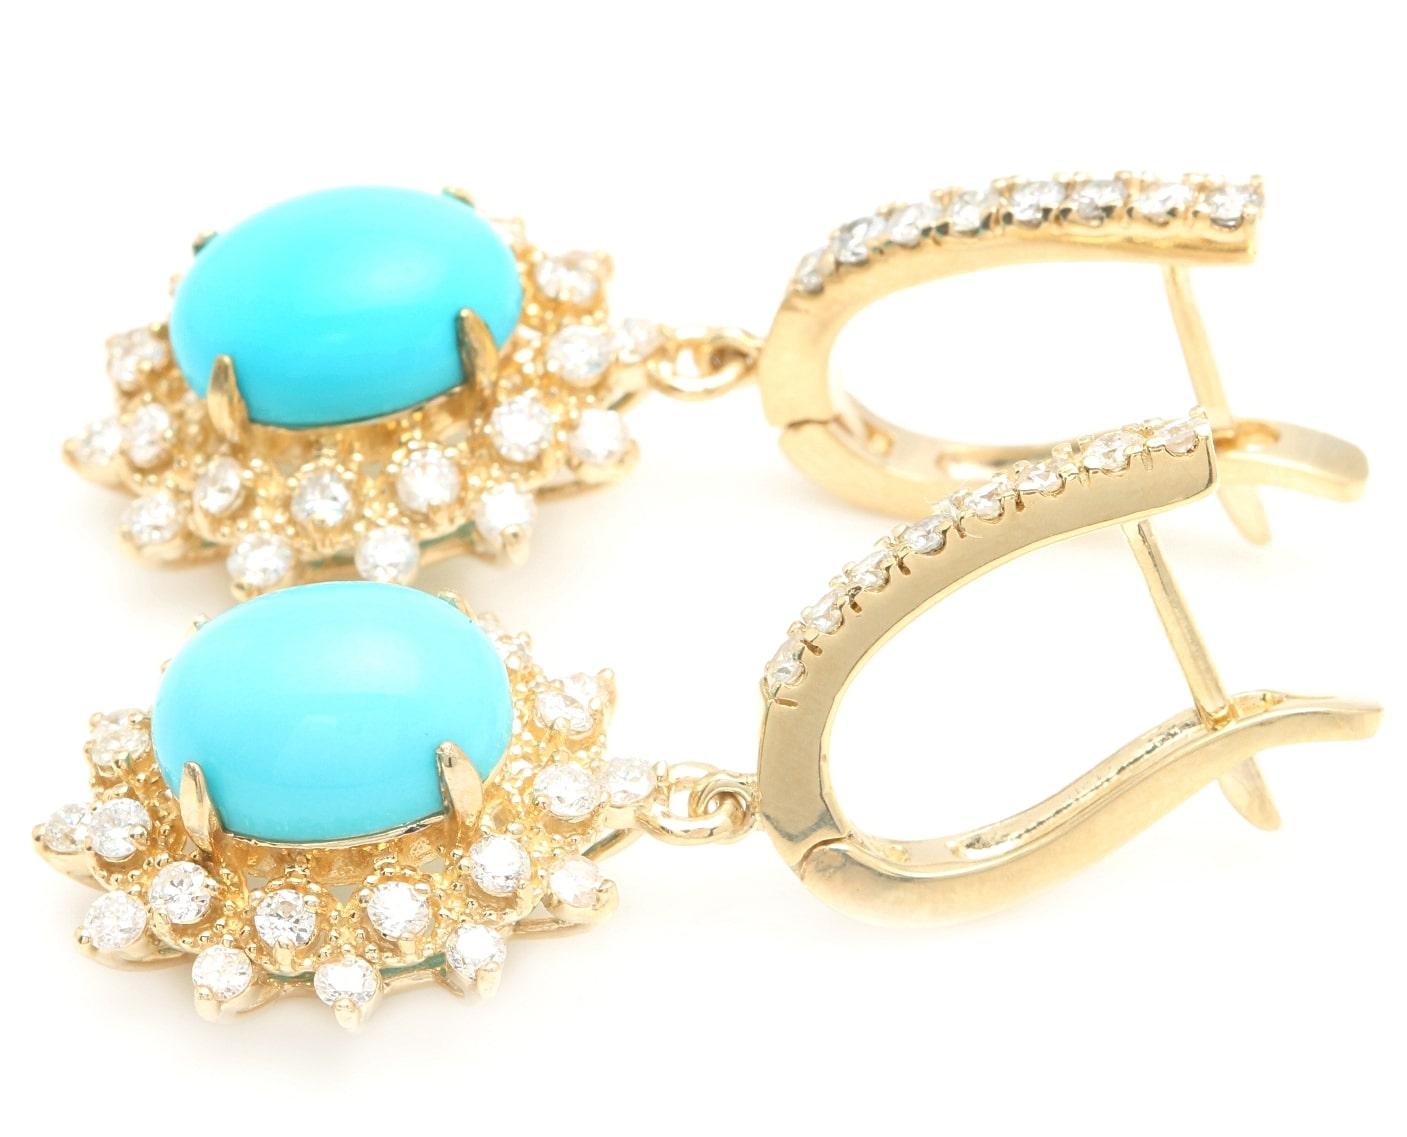 5.80 Carats Natural Turquoise and Diamond 14K Solid Yellow Gold Earrings

Amazing looking piece! 

Suggested Replacement Value: $6,900.00

Total Natural Round Cut White Diamonds Weight: Approx. 1.60 Carats (color G-H / Clarity SI1-SI2)

Total